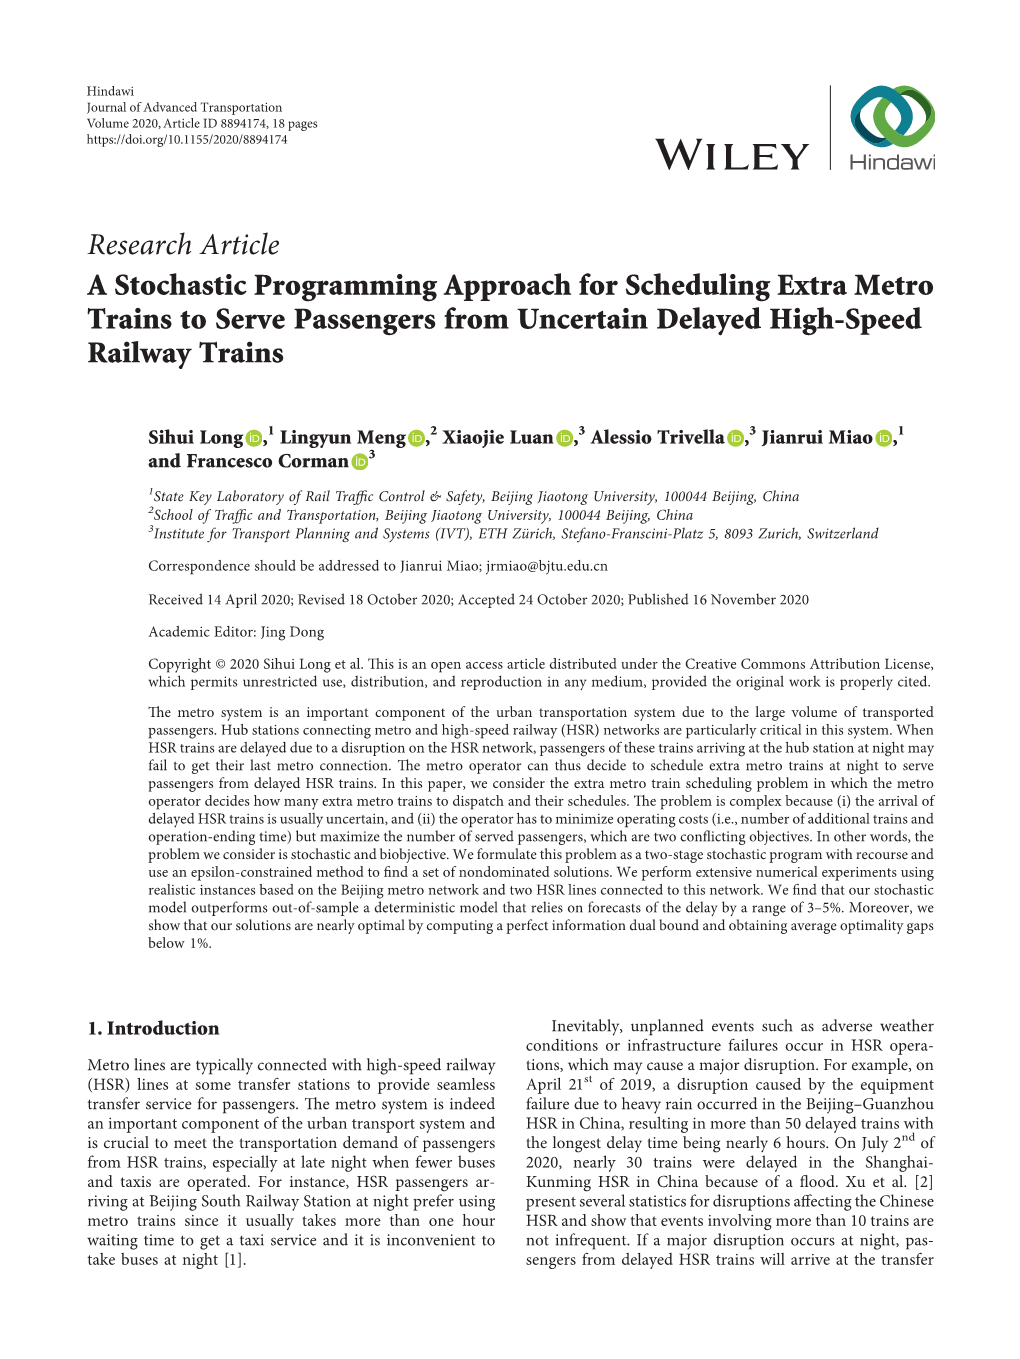 A Stochastic Programming Approach for Scheduling Extra Metro Trains to Serve Passengers from Uncertain Delayed High-Speed Railway Trains